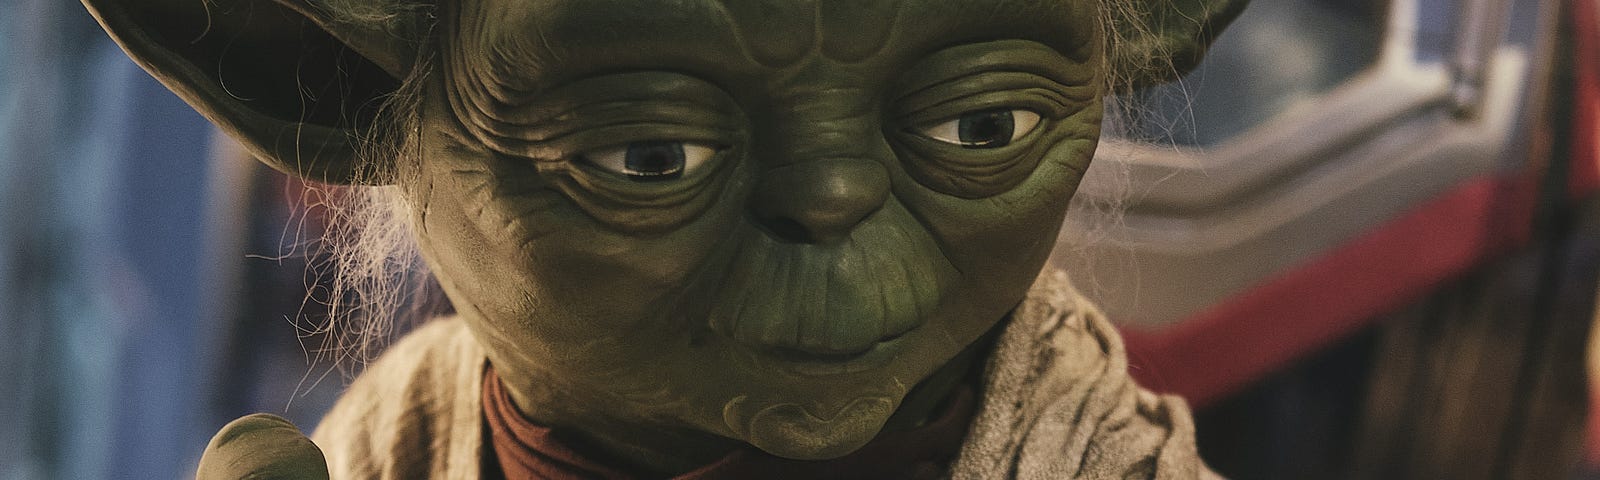 Yoda holding the top of his walking stick with green, clawed fingers